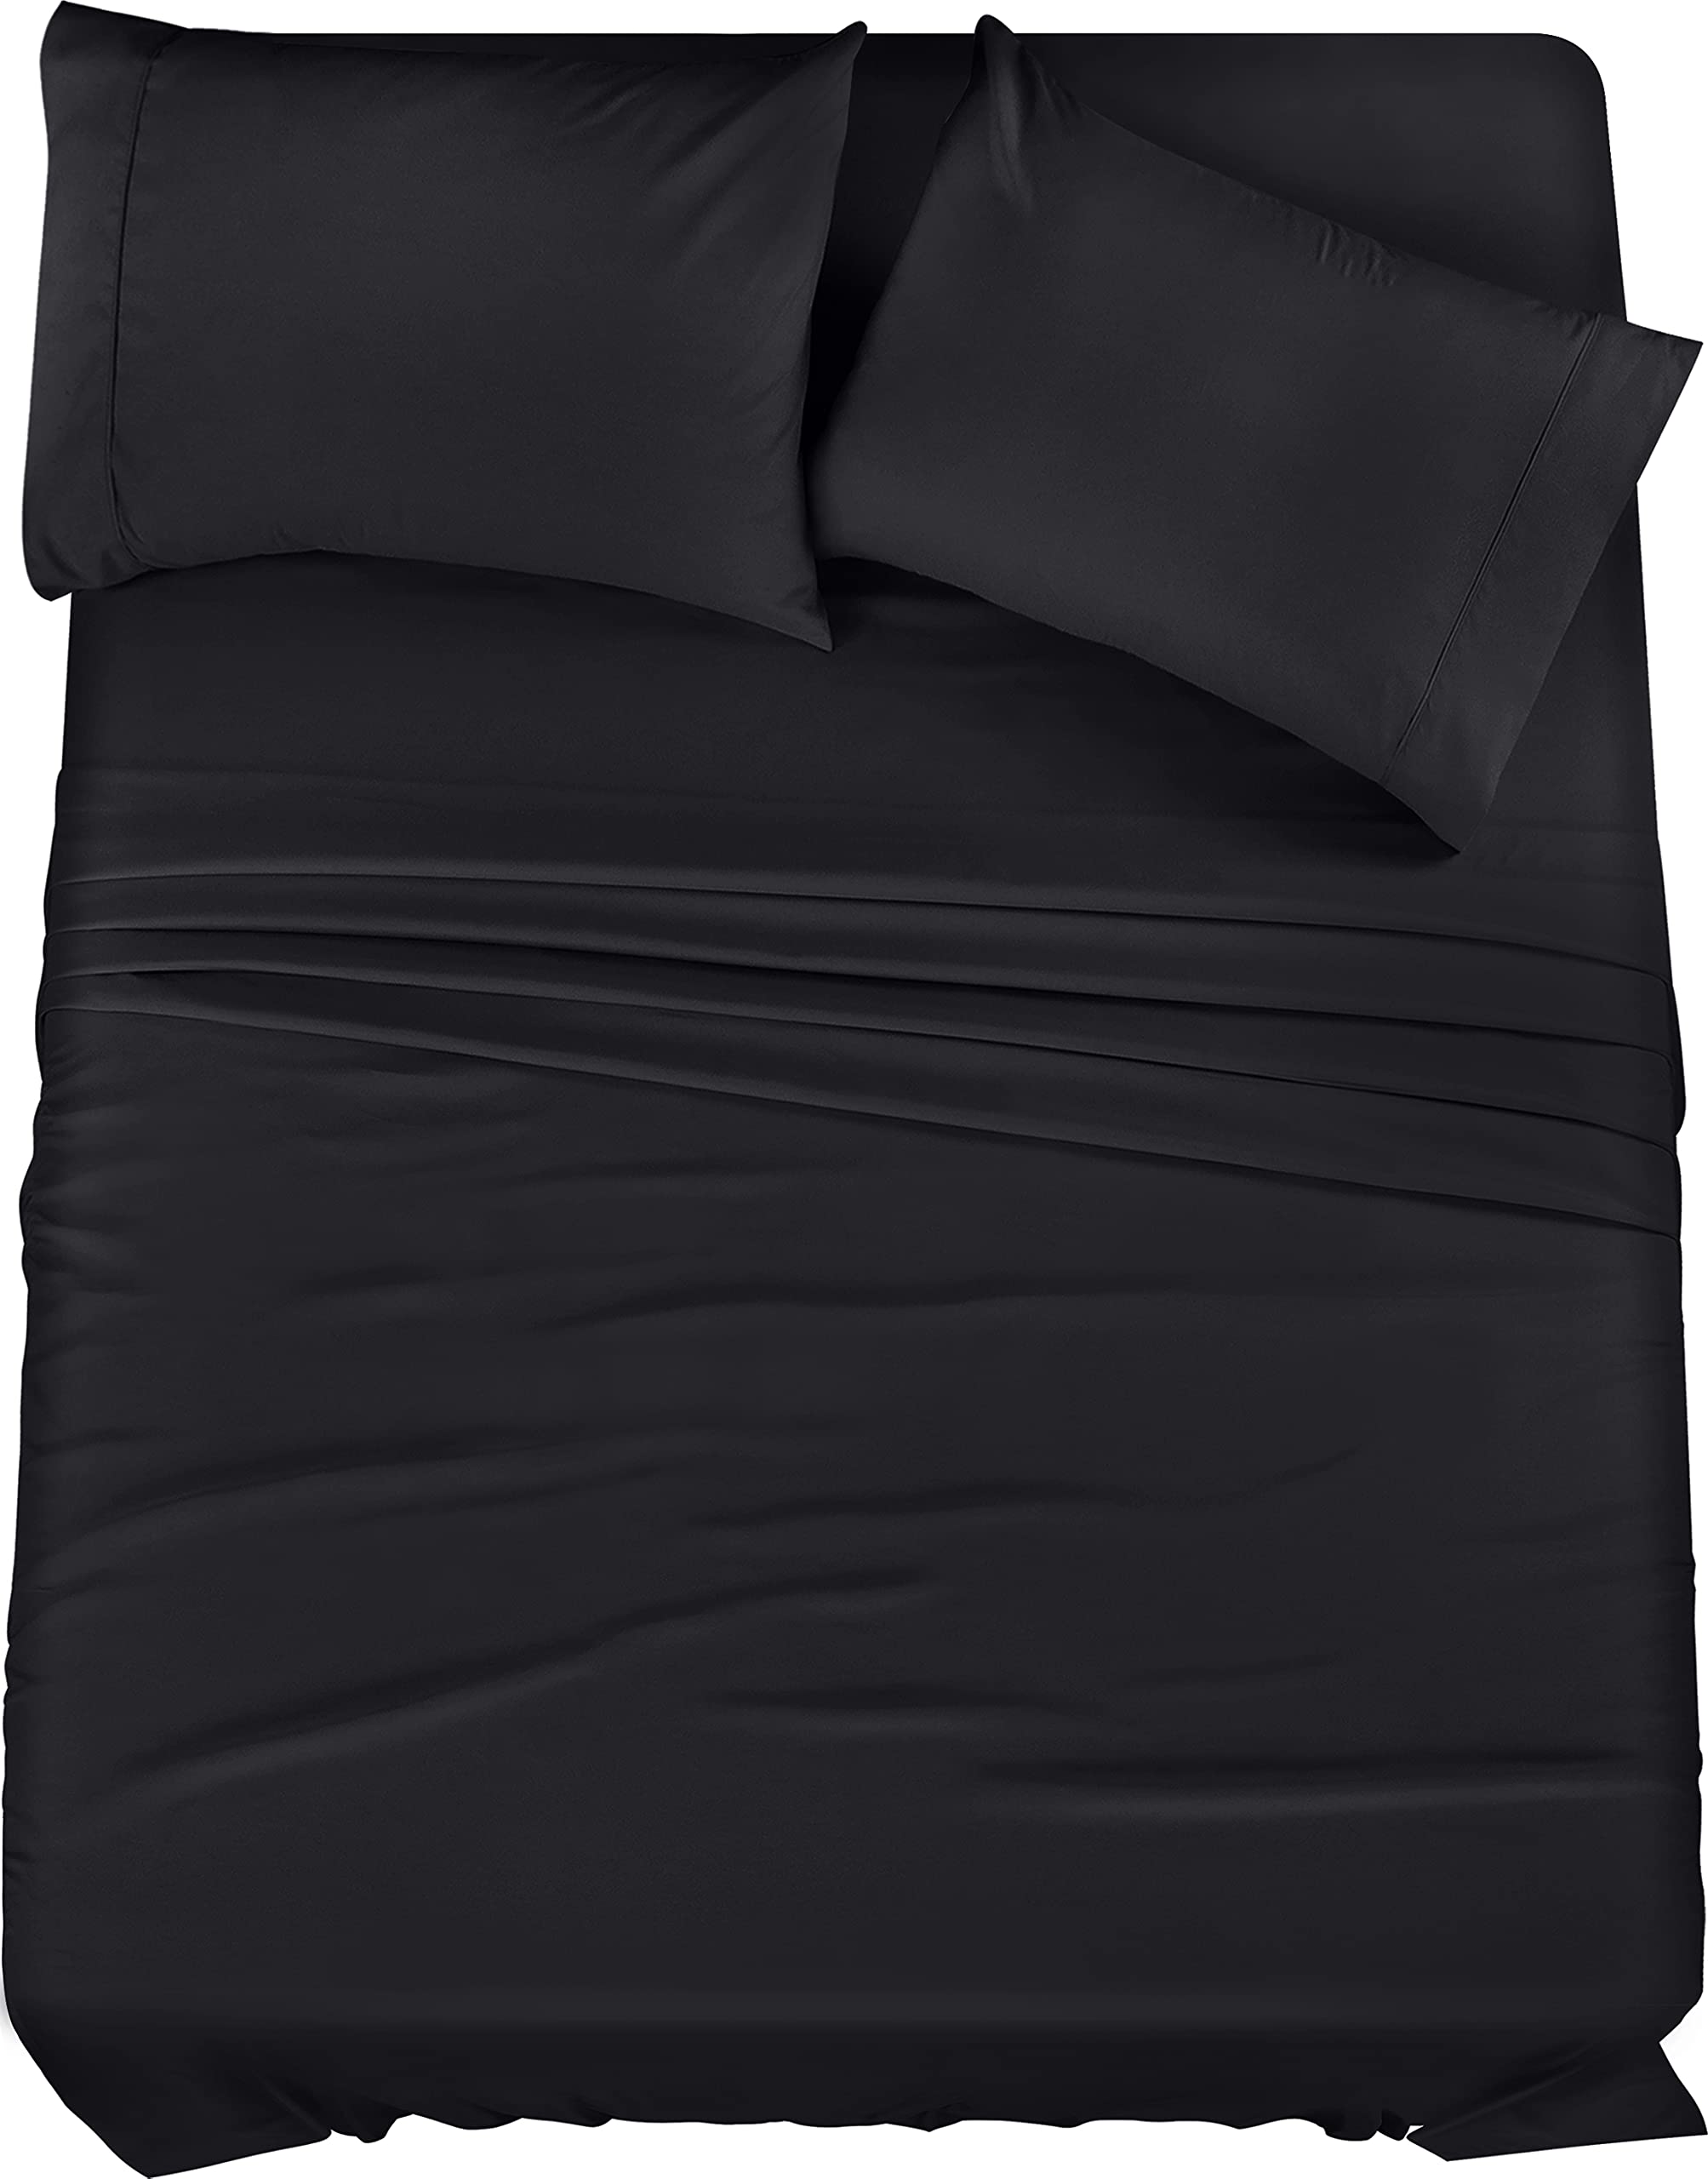 Book Cover Utopia Bedding Full Bed Sheets Set - 4 Piece Bedding - Brushed Microfiber - Shrinkage and Fade Resistant - Easy Care (Full, Black) Full Black